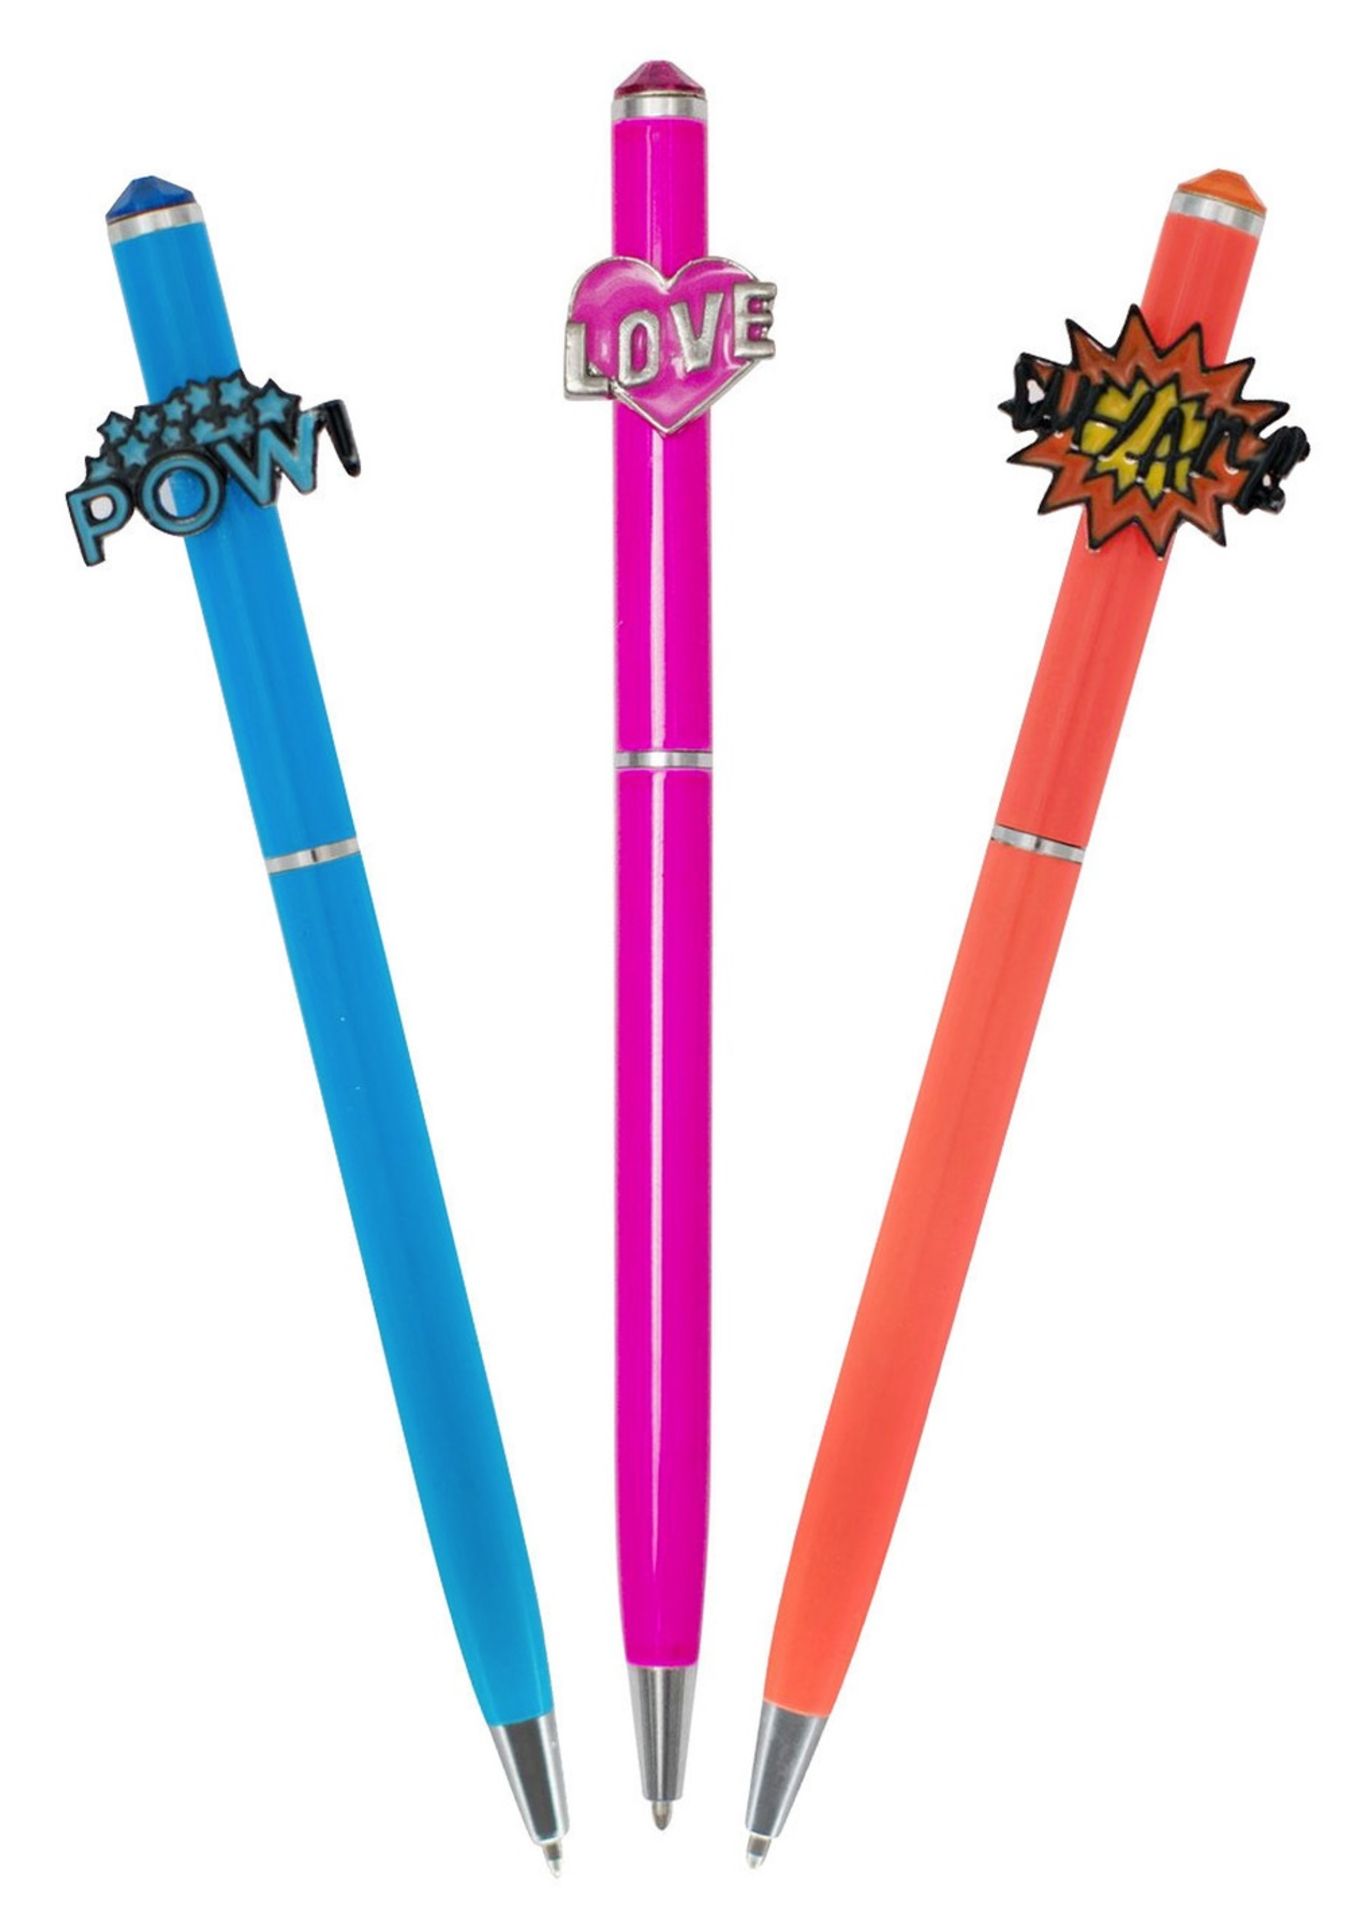 1 x ICE London 'Pop Art' Pen Set - Brand New Sealed Stock - Ideal Gift - Includes 3 x Pens Featuring - Image 2 of 2